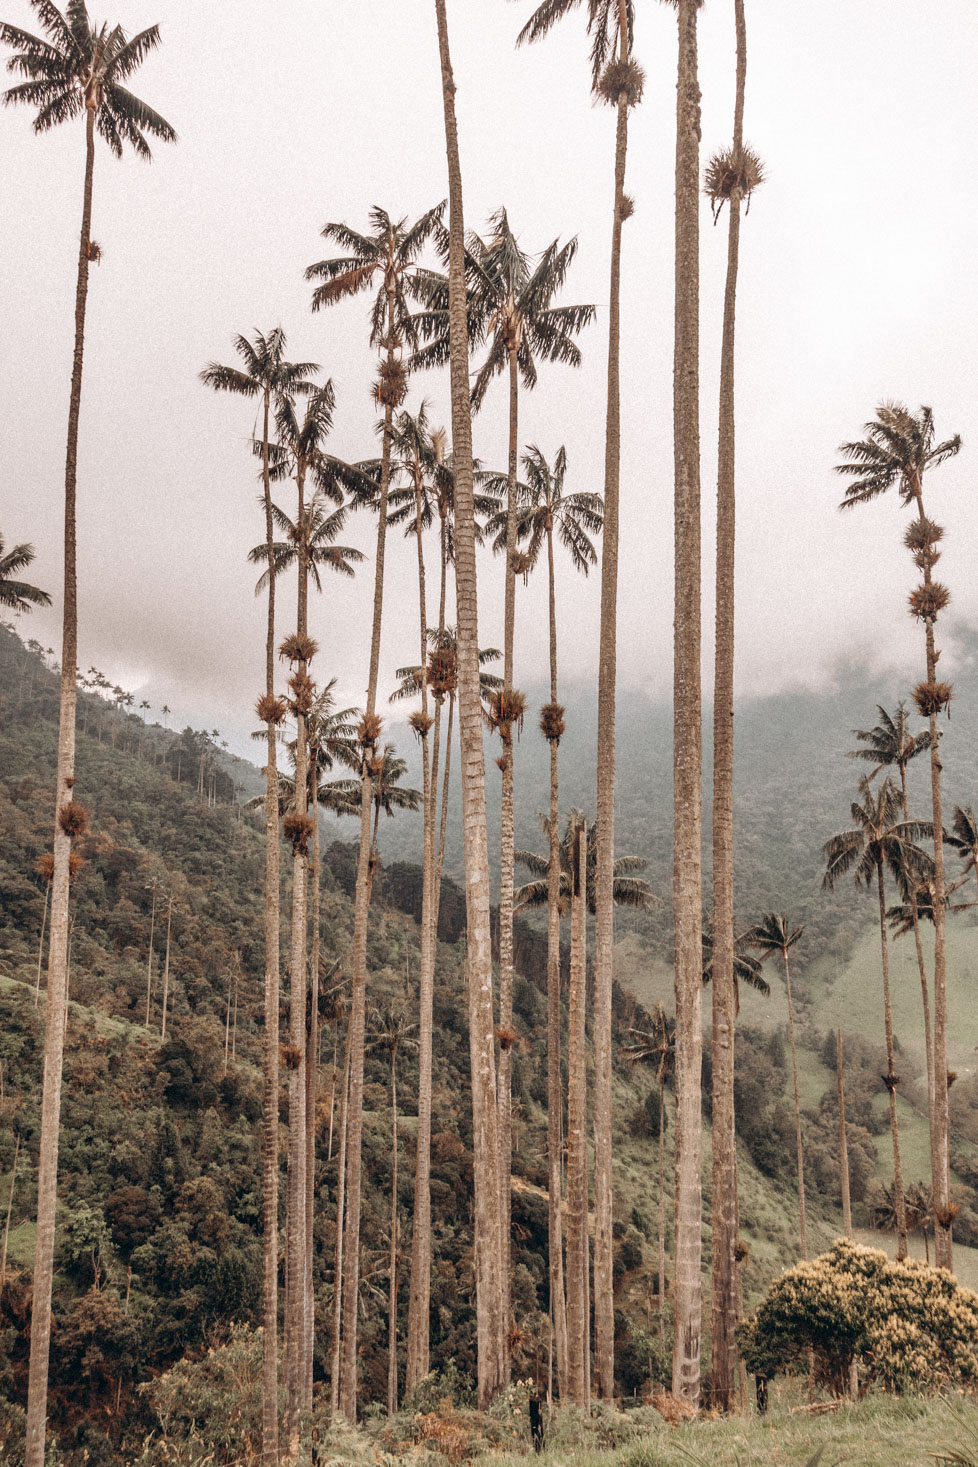 colombia itinerary - cocora valley